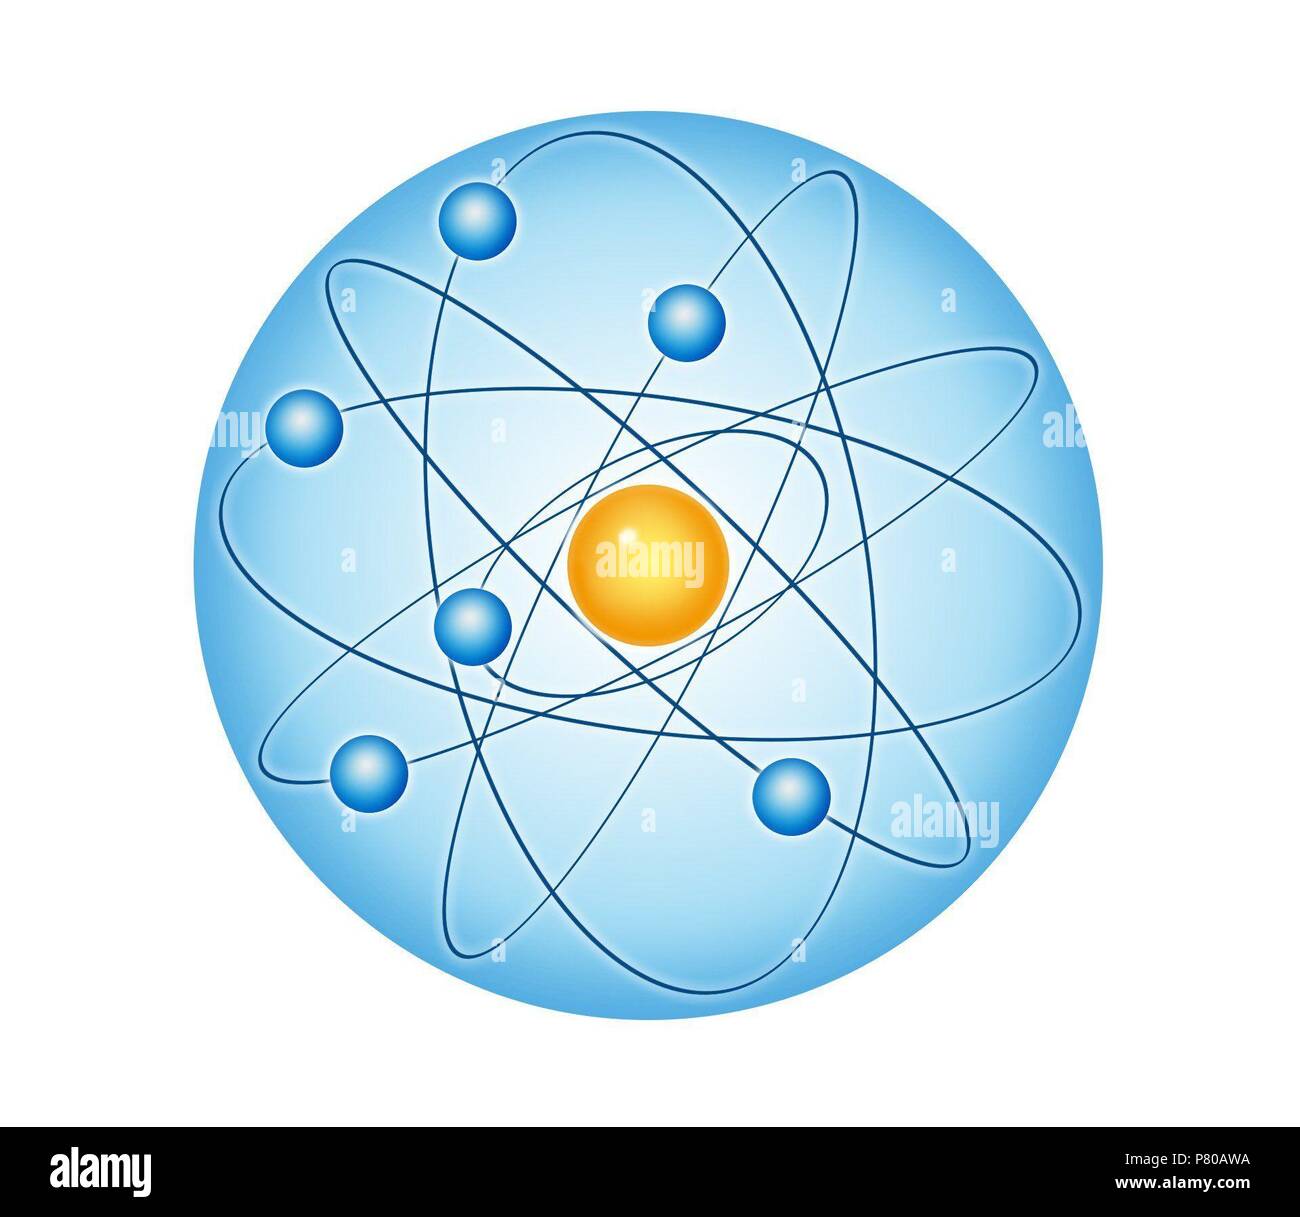 Atom. Atomic model of Rutherford. Stock Photo